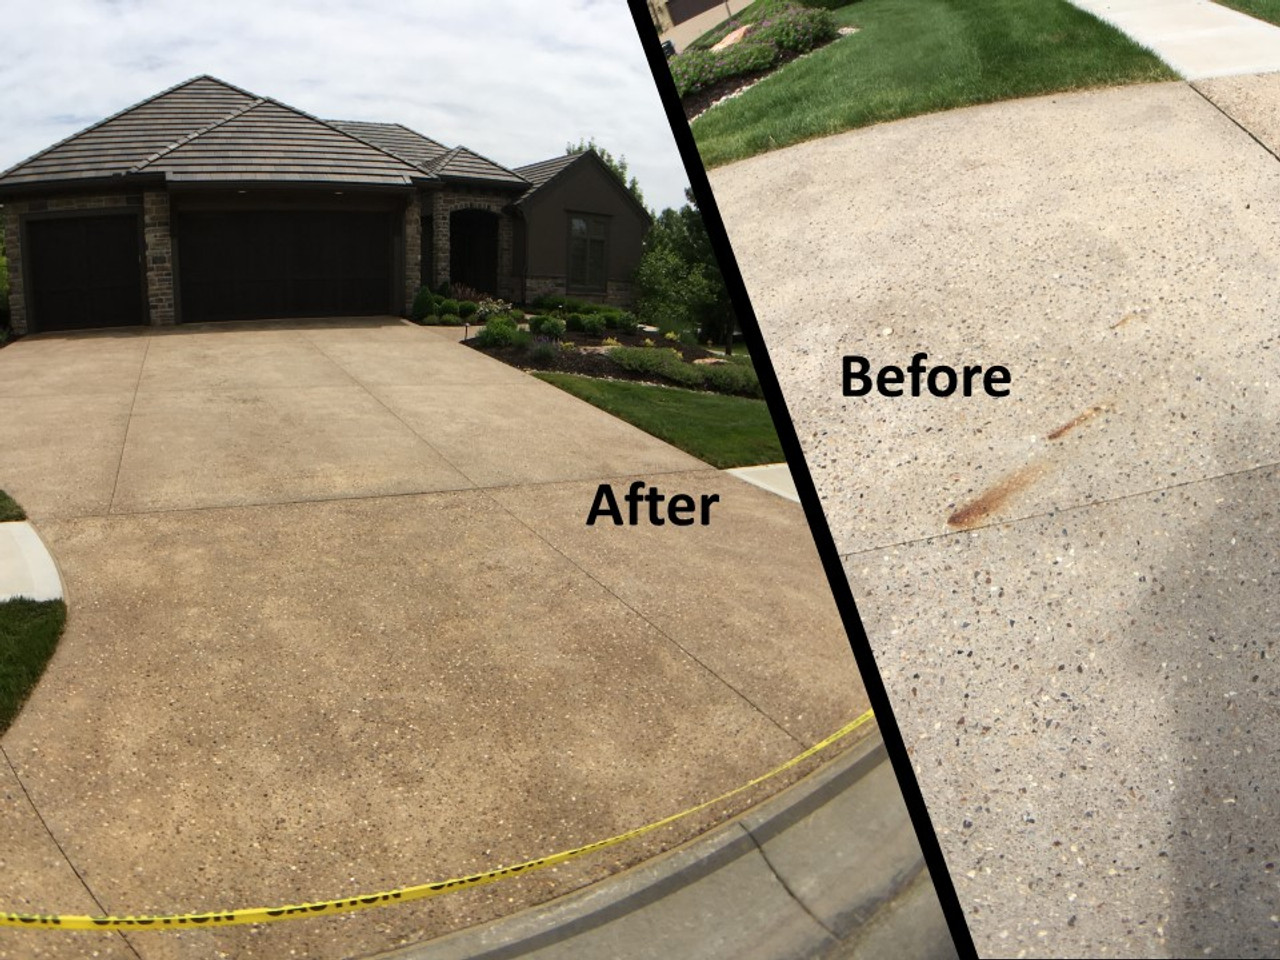 Rust stain removed on an exposed aggregate concrete driveway